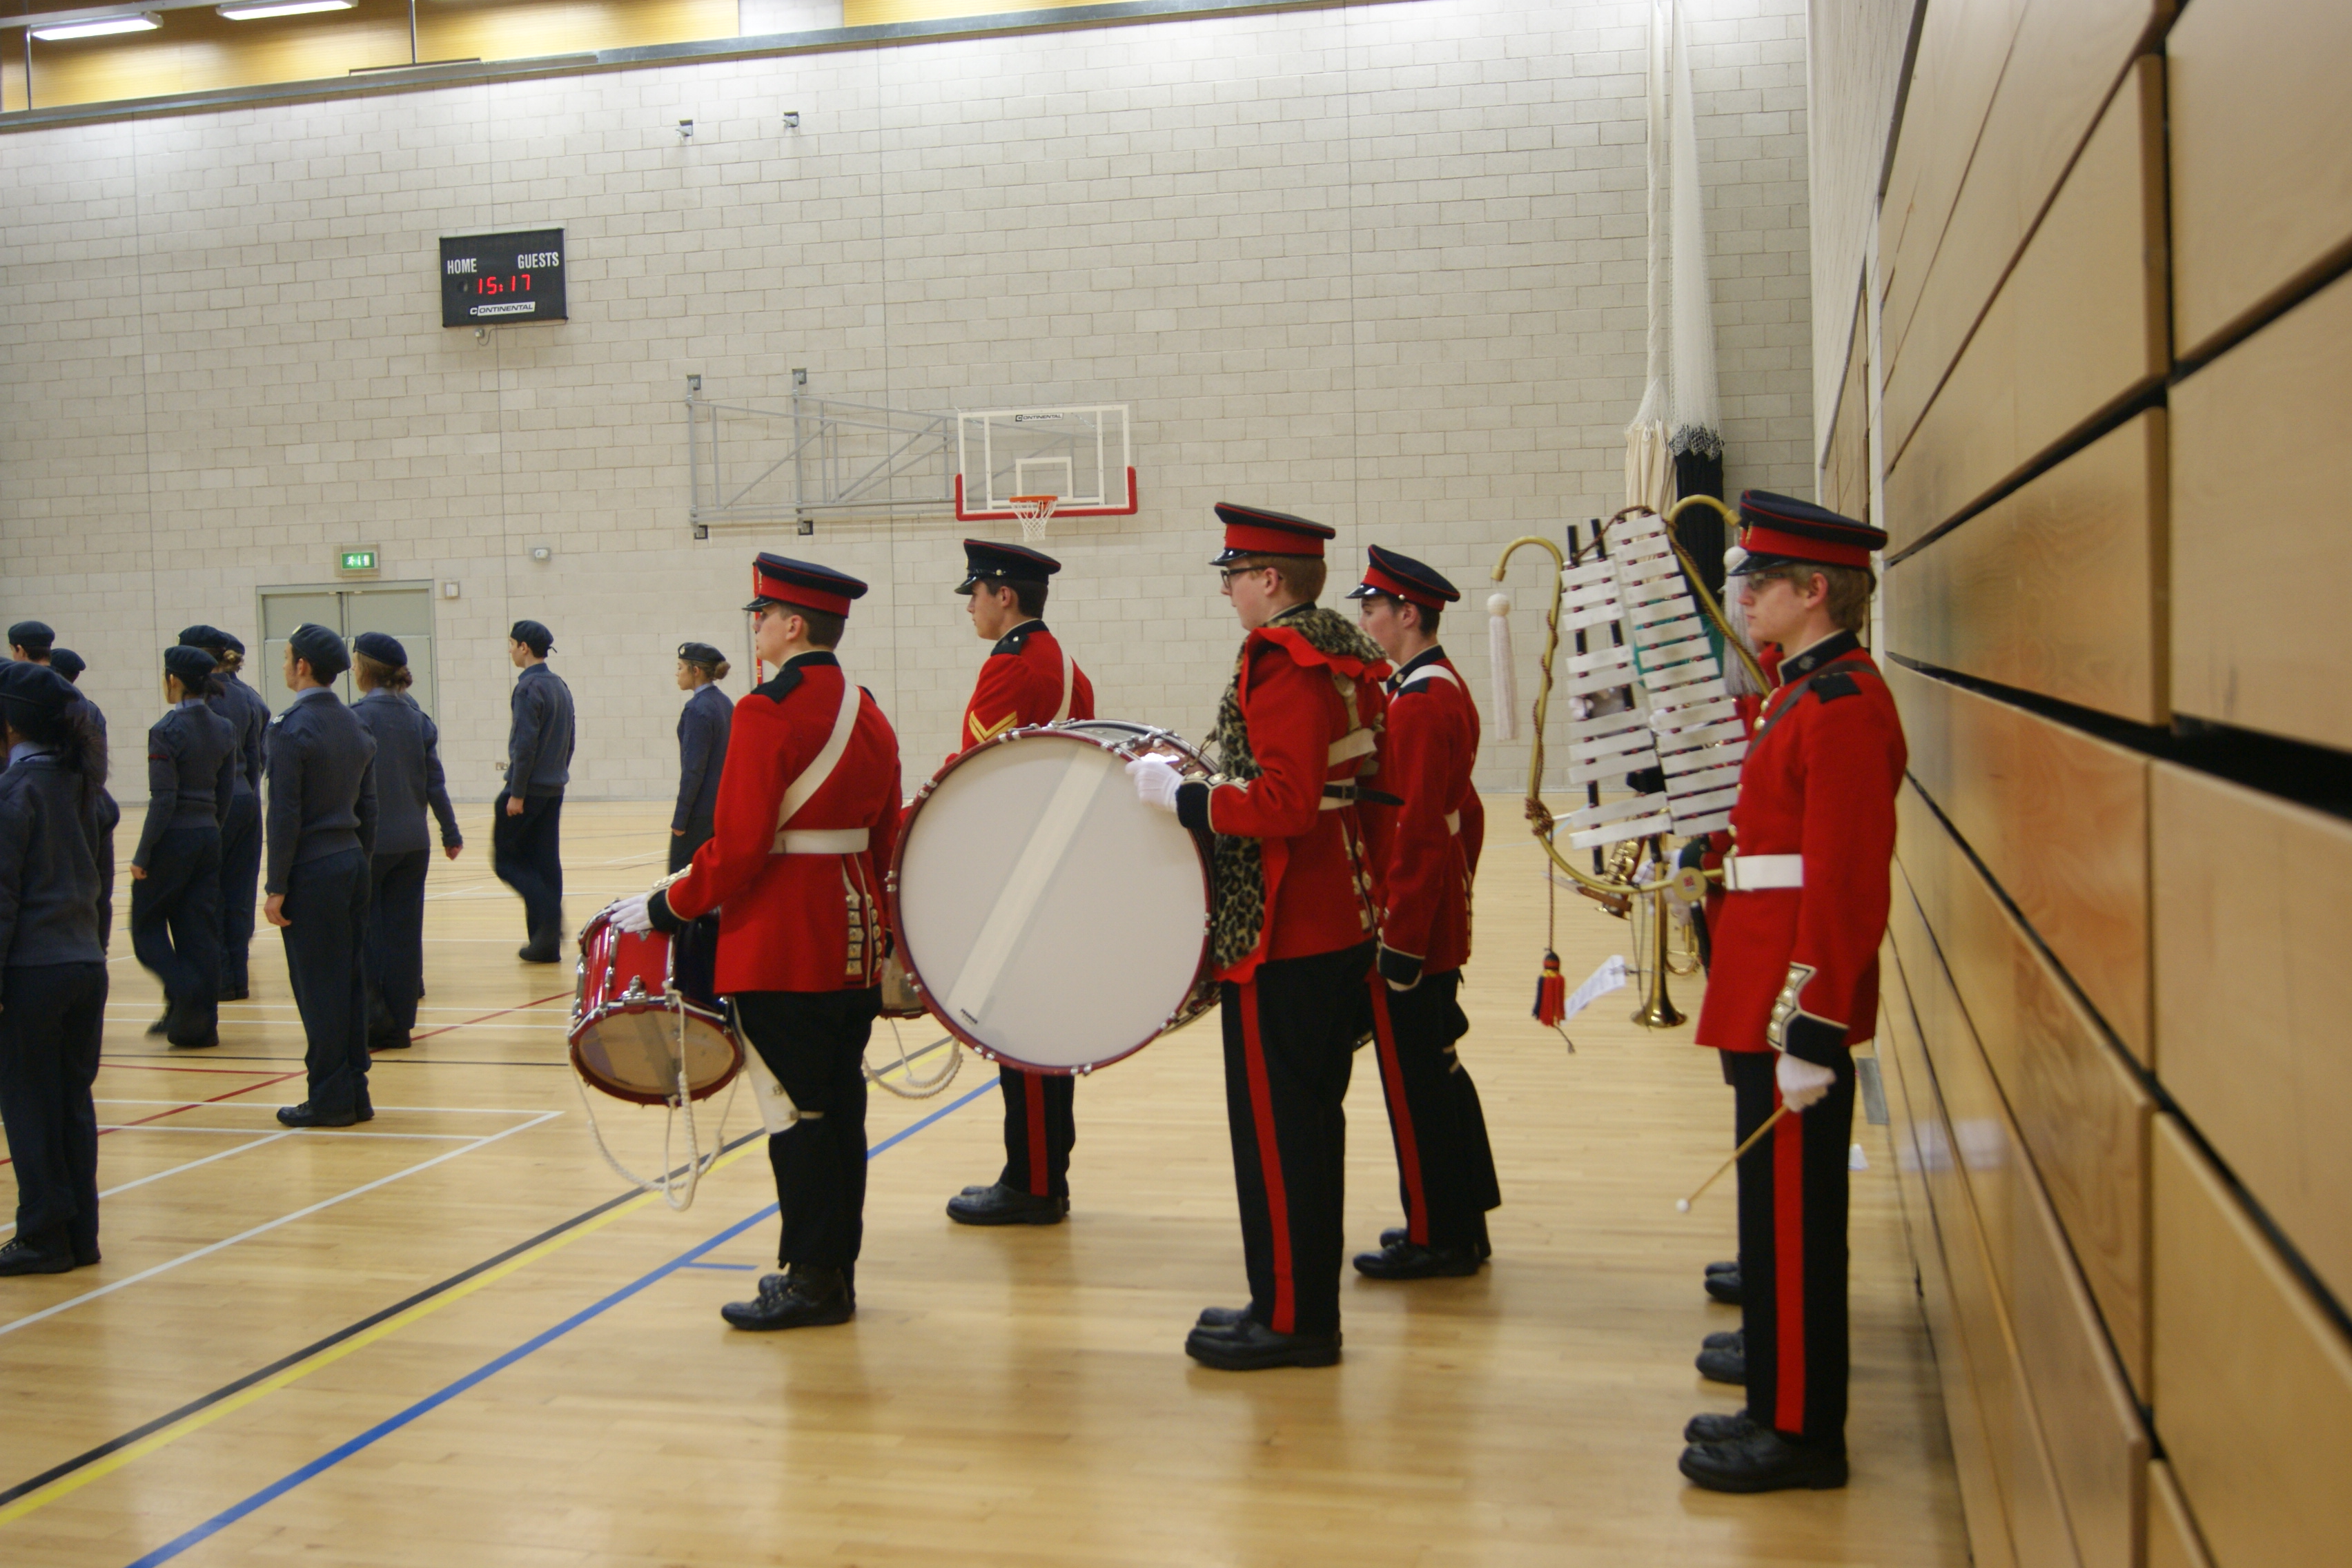 Pass Out Parade, 7th December 2015